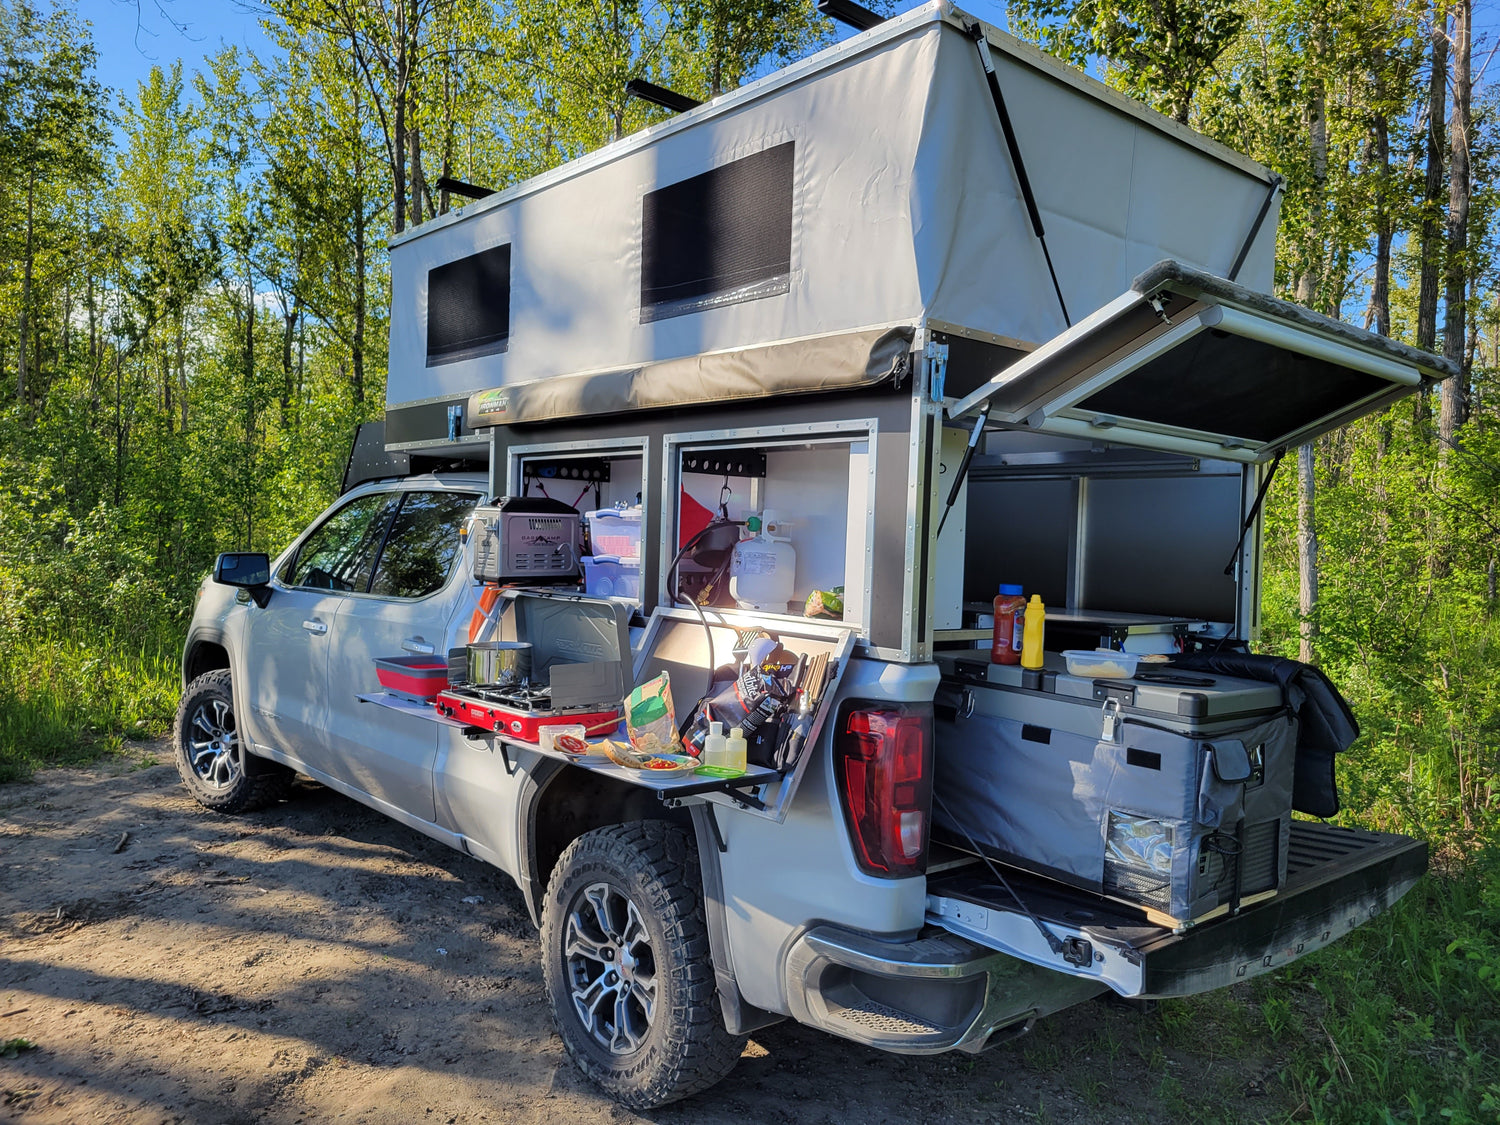 Highly modified OVRLND pop-up camper shell on GMC truck. Customer has done a number of modifications for cooking and camping.